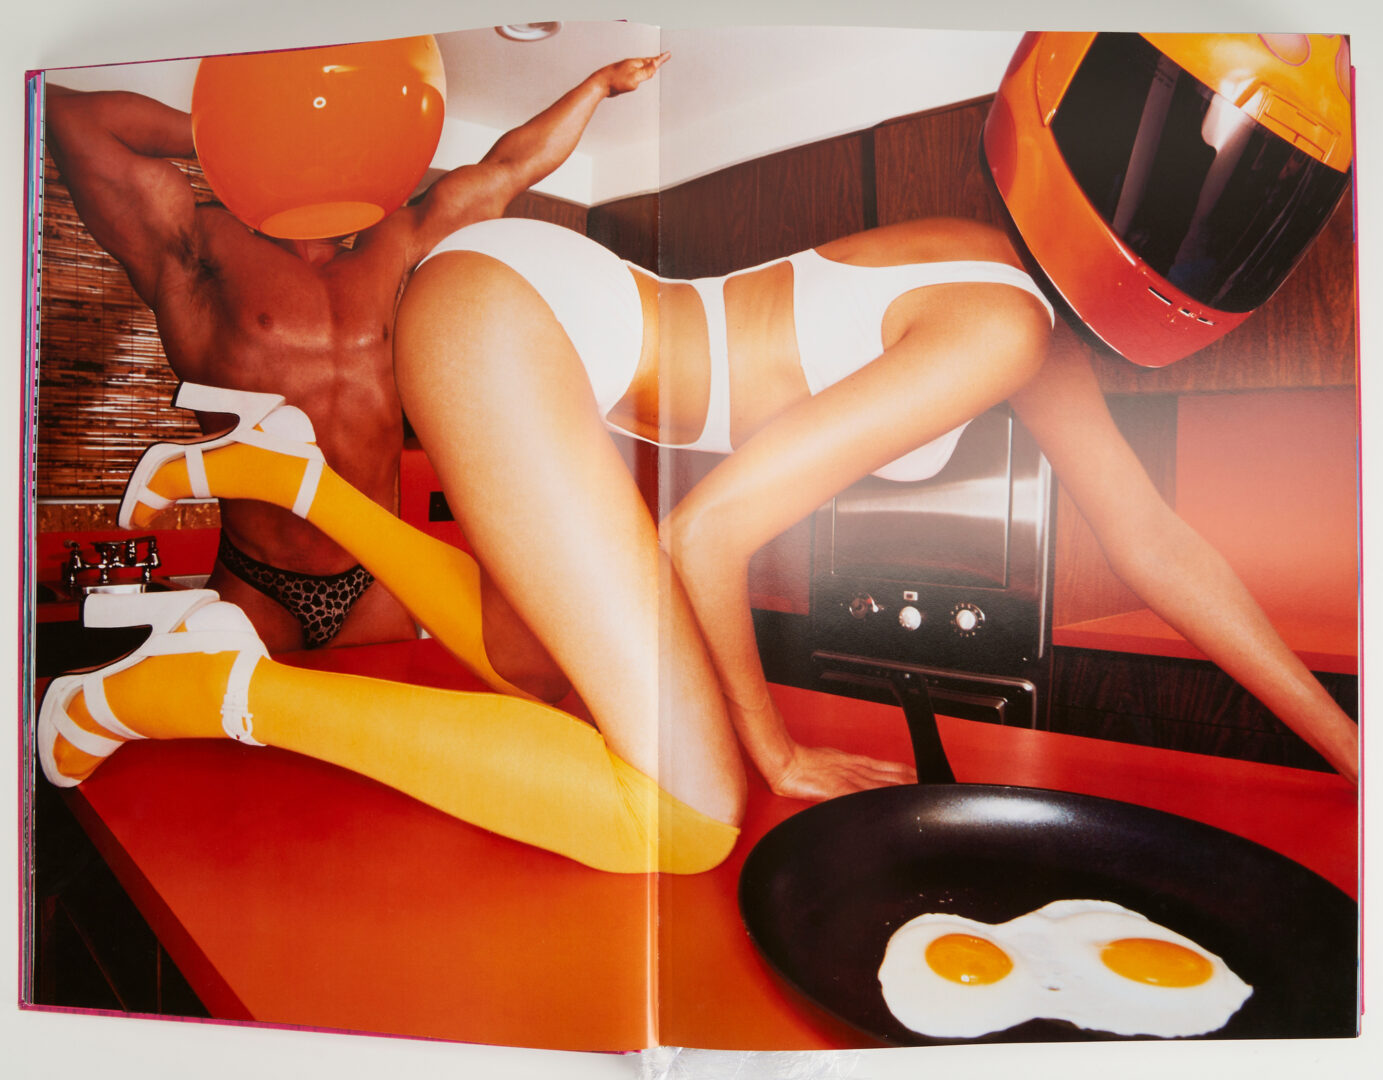 Lot 547: Signed LaChapelle Artists & Prostitutes, Ltd. Ed. + Houseago, What Went Down, 2 items